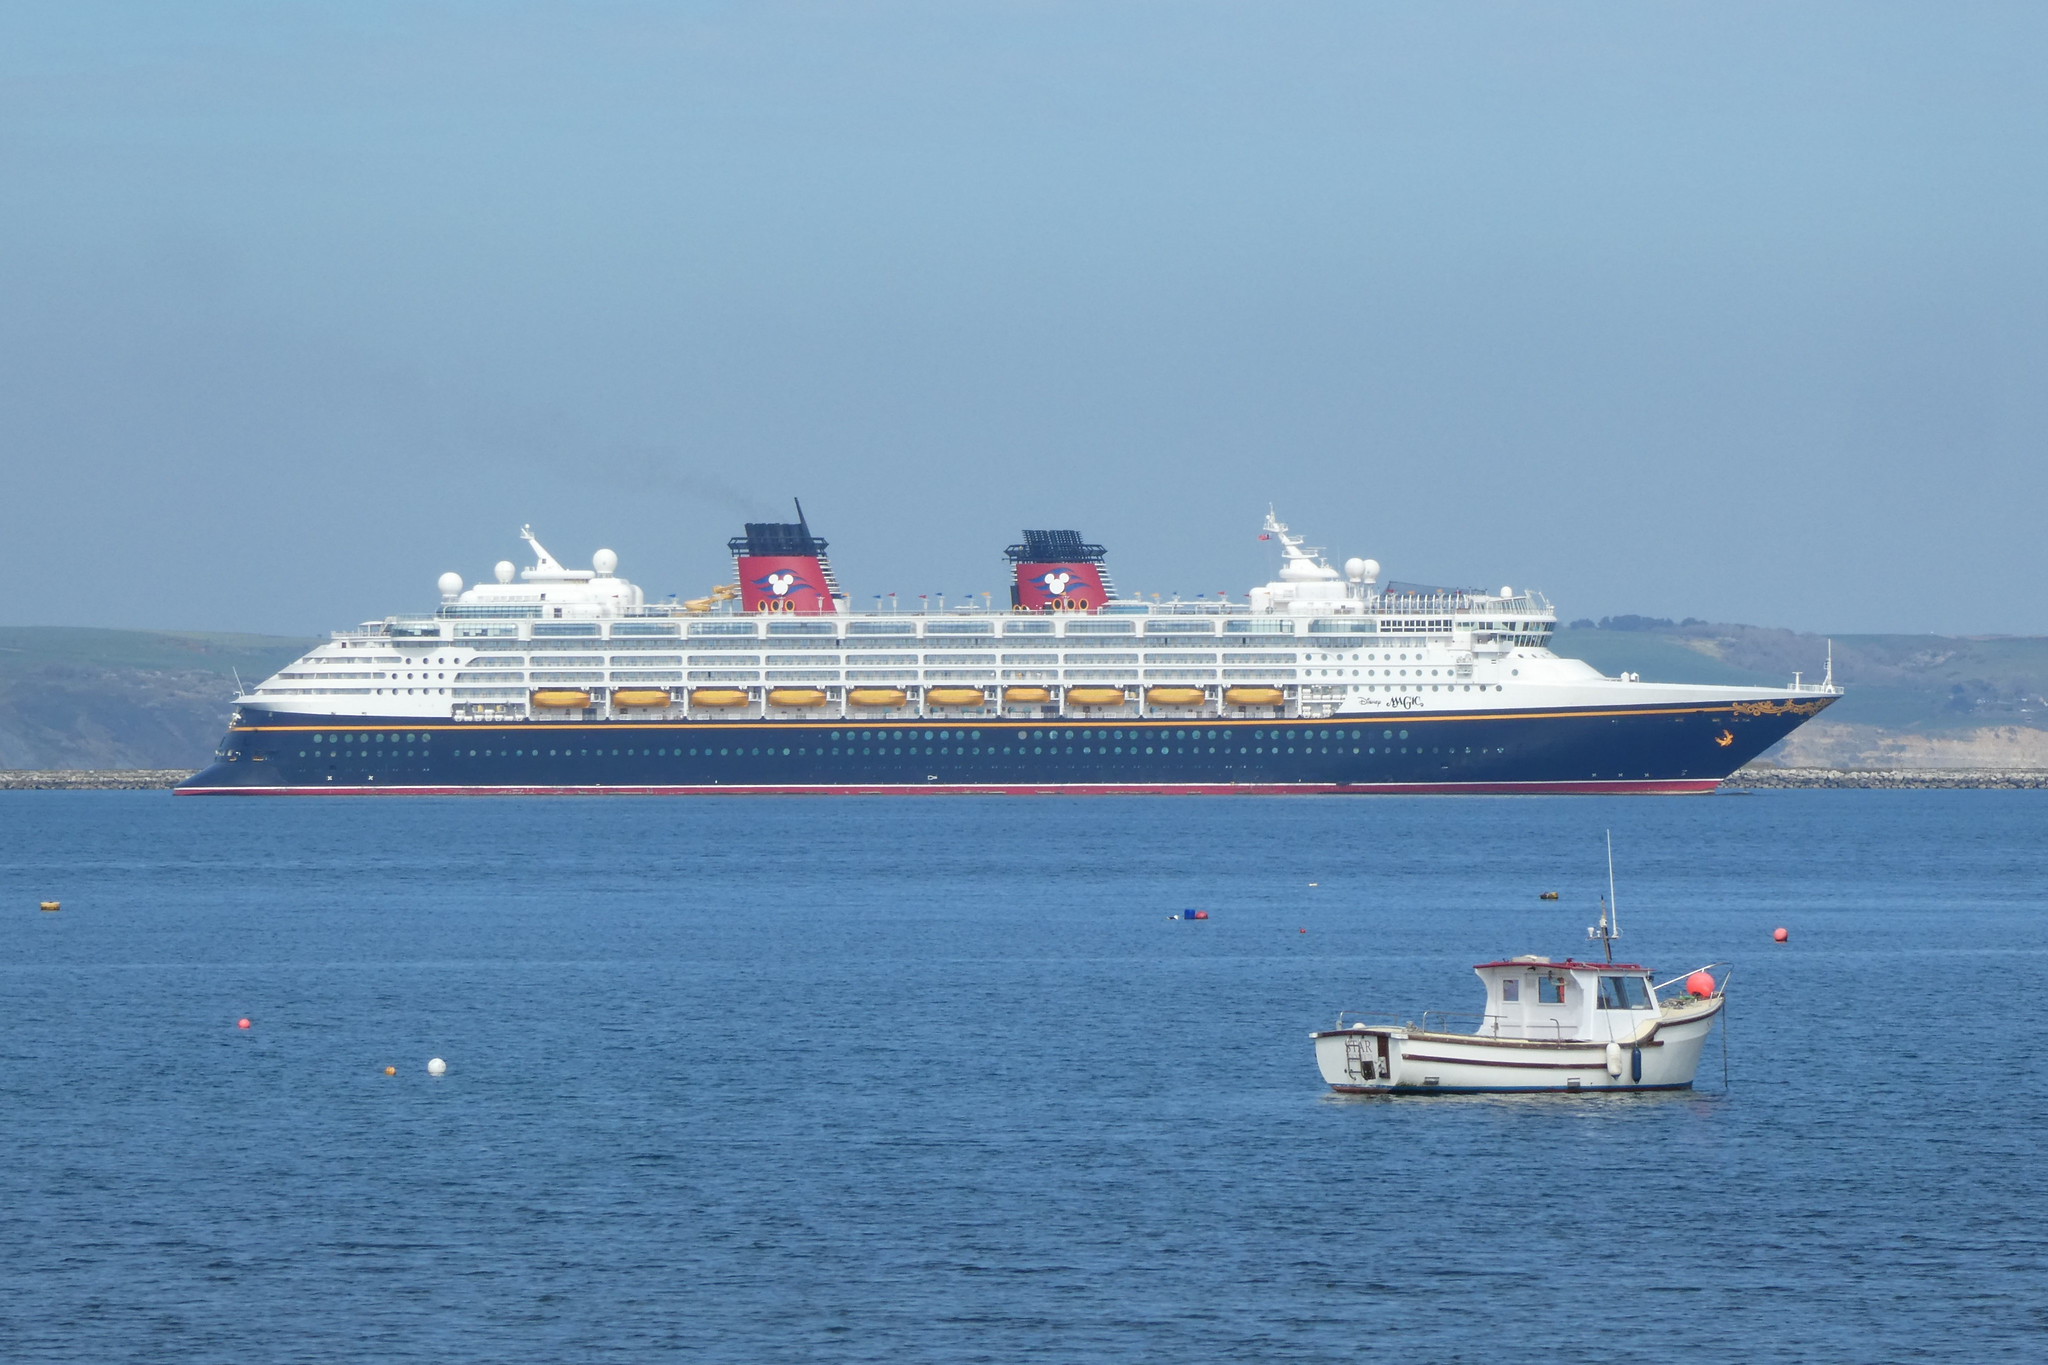 A cruise ship with Mickey Mouse insignia takes up most of the horizon.